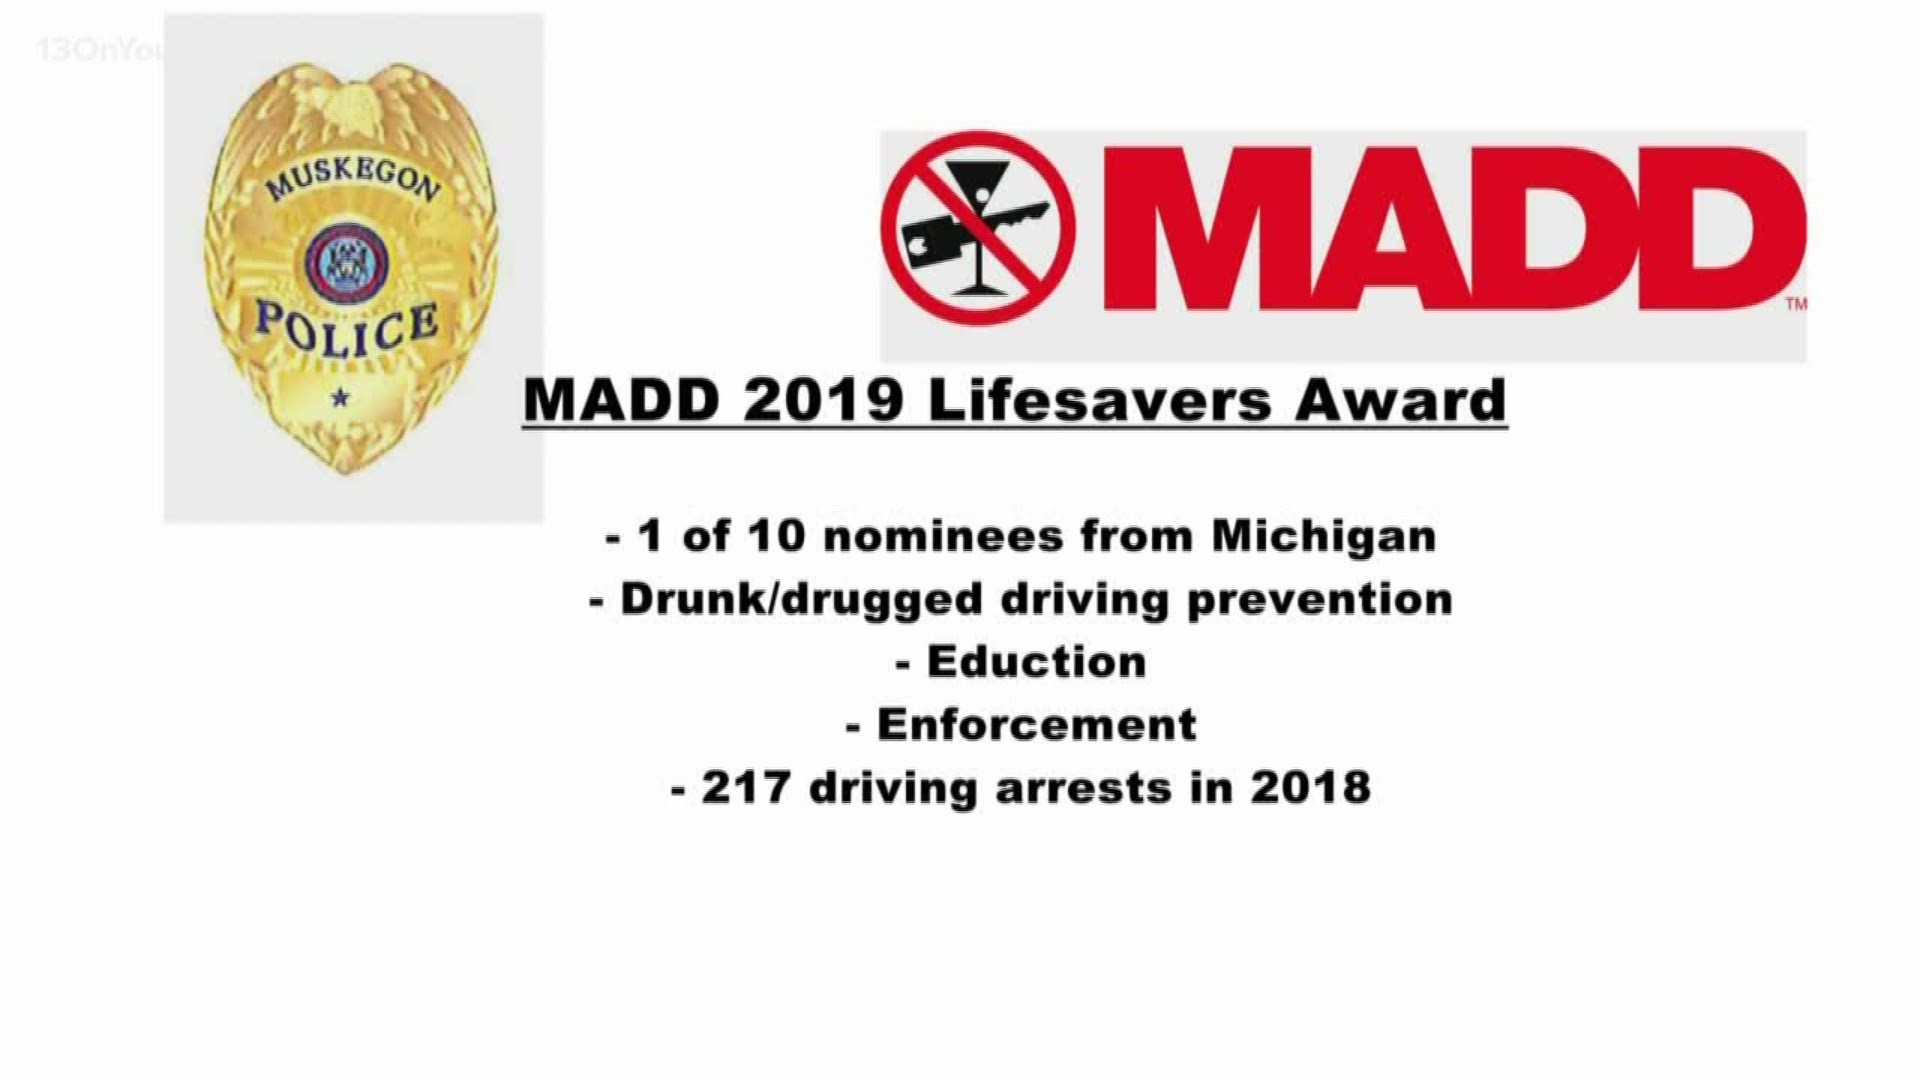 Their work on limiting impaired driving is being recognized.